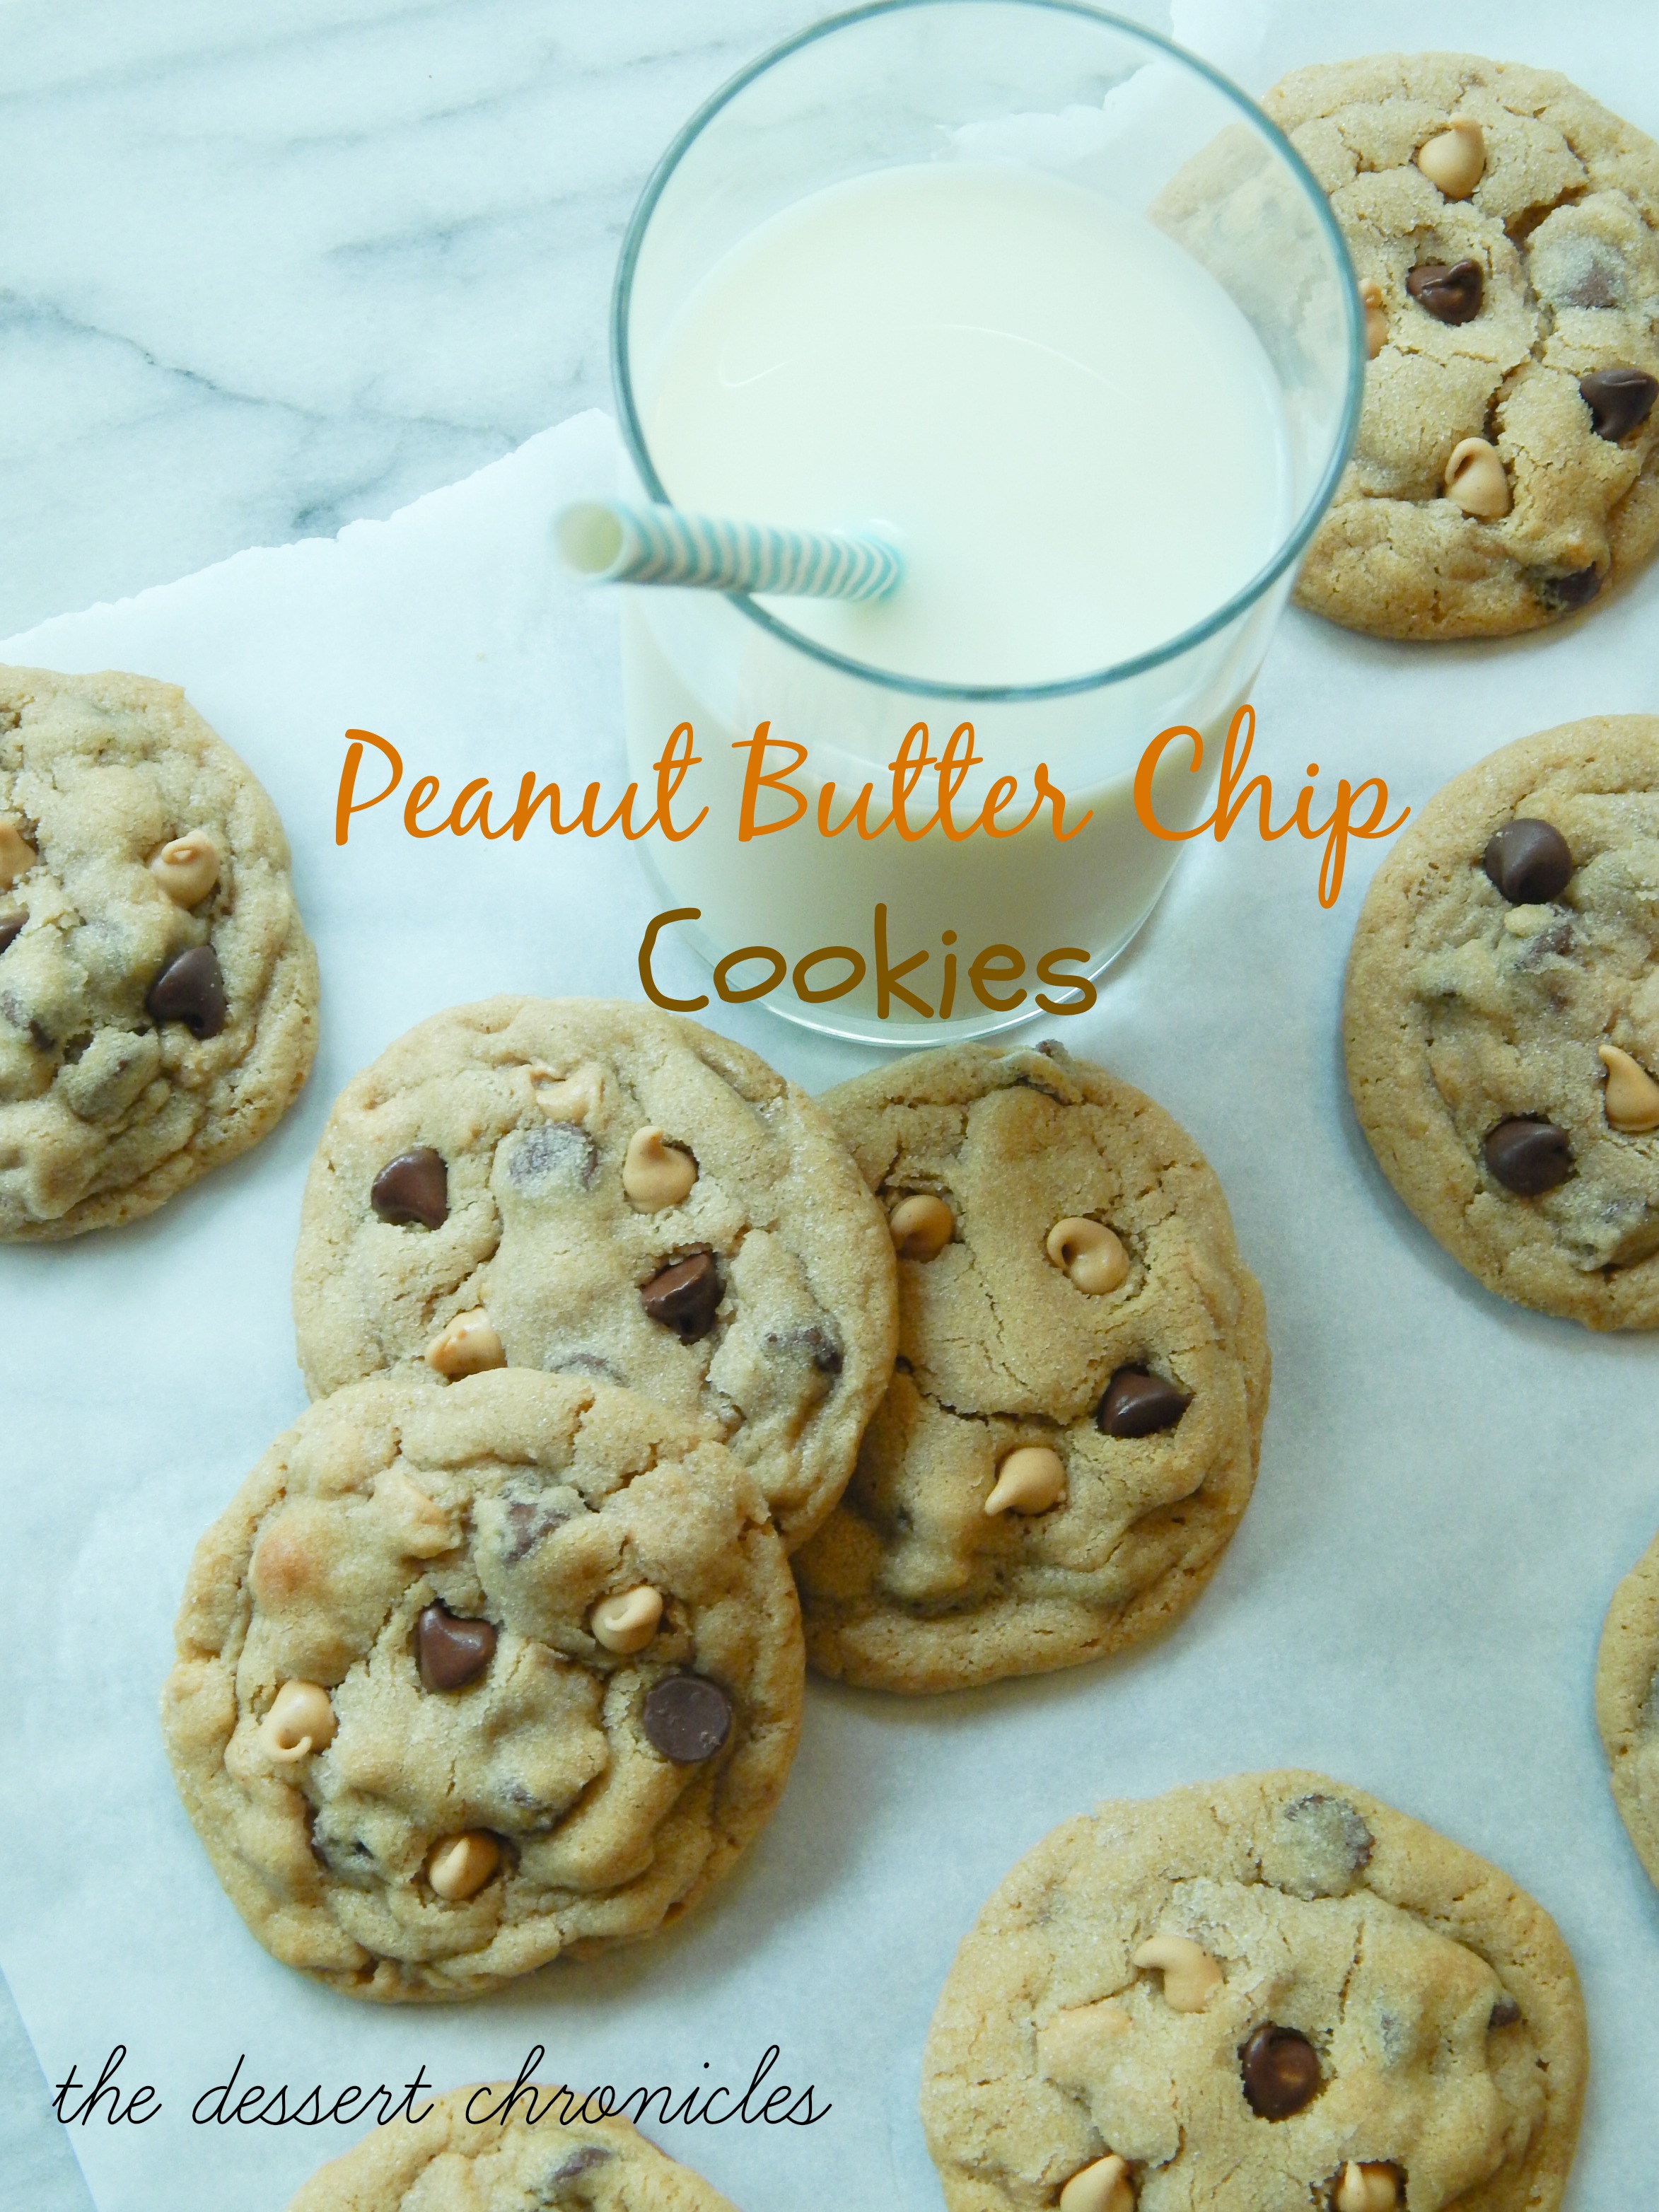 Peanut Butter Chip Cookies: May Mystery Dish - the dessert chronicles